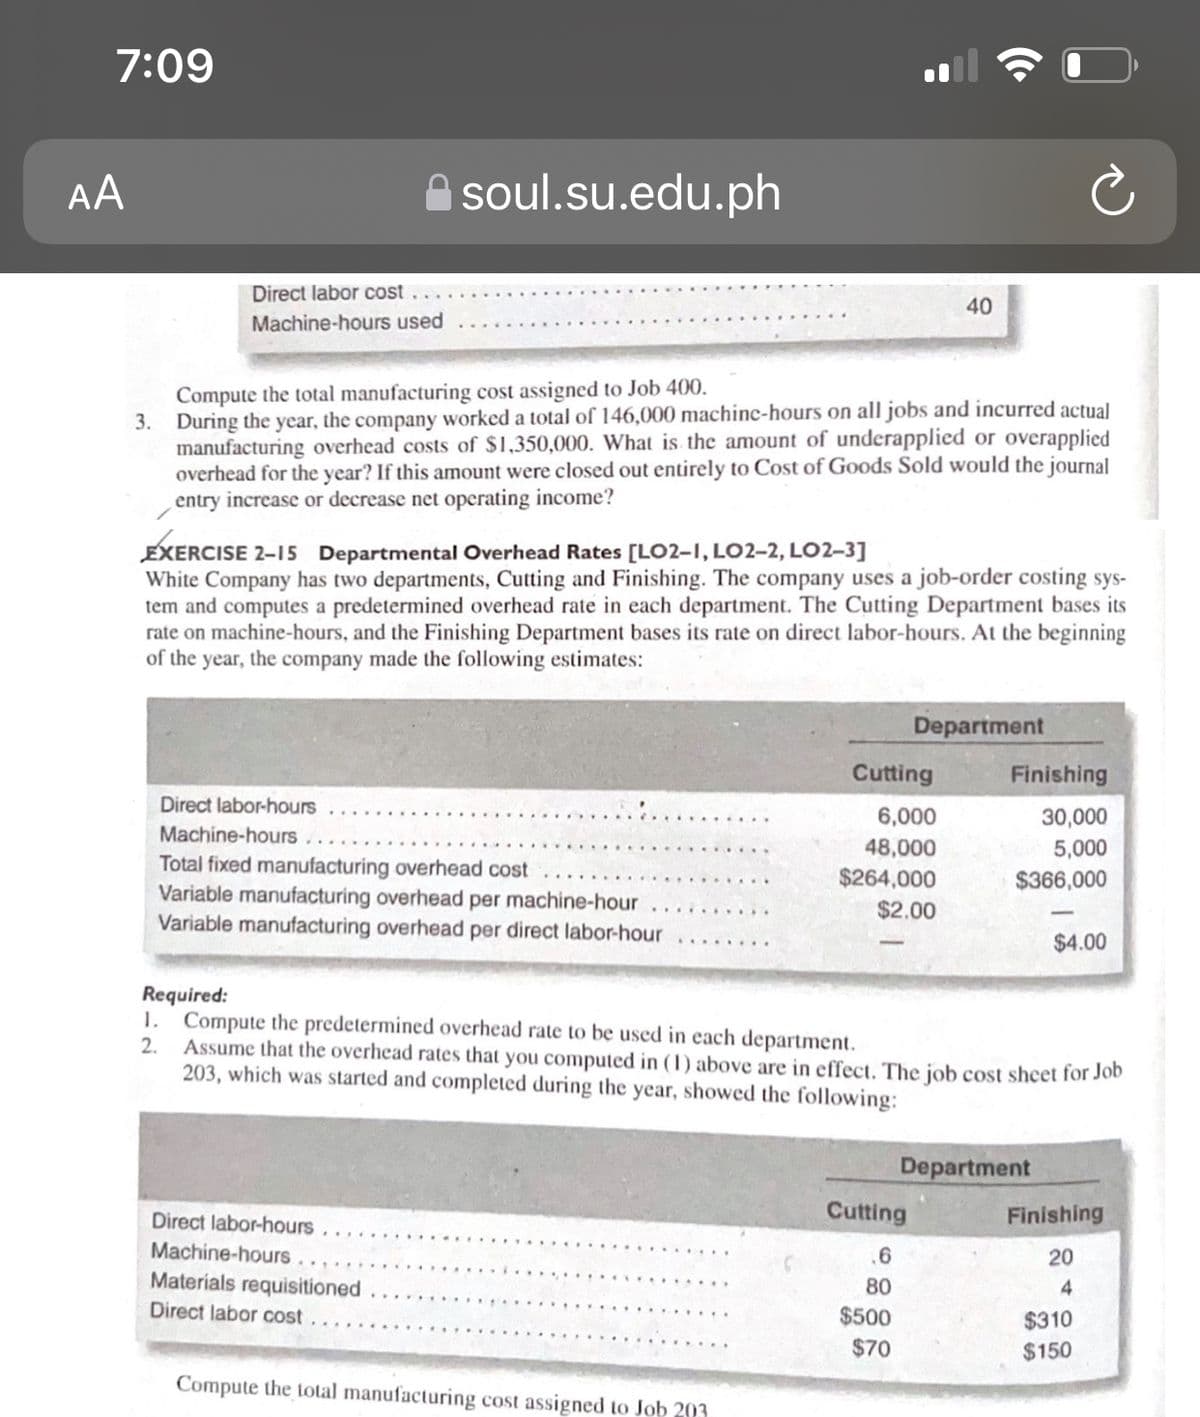 7:09
AA
soul.su.edu.ph
40
Direct labor cost
Machine-hours used
Compute the total manufacturing cost assigned to Job 400.
3. During the year, the company worked a total of 146,000 machine-hours on all jobs and incurred actual
manufacturing overhead costs of $1,350,000. What is the amount of underapplied or overapplied
overhead for the year? If this amount were closed out entirely to Cost of Goods Sold would the journal
entry increase or decrease net operating income?
EXERCISE 2-15 Departmental Overhead Rates [LO2-1, LO2-2, LO2-3]
White Company has two departments, Cutting and Finishing. The company uses a job-order costing sys-
tem and computes a predetermined overhead rate in each department. The Cutting Department bases its
rate on machine-hours, and the Finishing Department bases its rate on direct labor-hours. At the beginning
of the year, the company made the following estimates:
Department
Cutting
Finishing
6,000
30,000
Direct labor-hours
Machine-hours
48,000
5,000
Total fixed manufacturing overhead cost
$264,000
$366,000
Variable manufacturing overhead per machine-hour
Variable manufacturing overhead per direct labor-hour
$2.00
$4.00
Required:
1. Compute the predetermined overhead rate to be used in each department.
2. Assume that the overhead rates that you computed in (1) above are in effect. The job cost sheet for Job
203, which was started and completed during the year, showed the following:
Department
Cutting
Finishing
Direct labor-hours.
Machine-hours..
.6
20
Materials requisitioned
80
4
Direct labor cost
$500
$310
$70
$150
Compute the total manufacturing cost assigned to Job 203